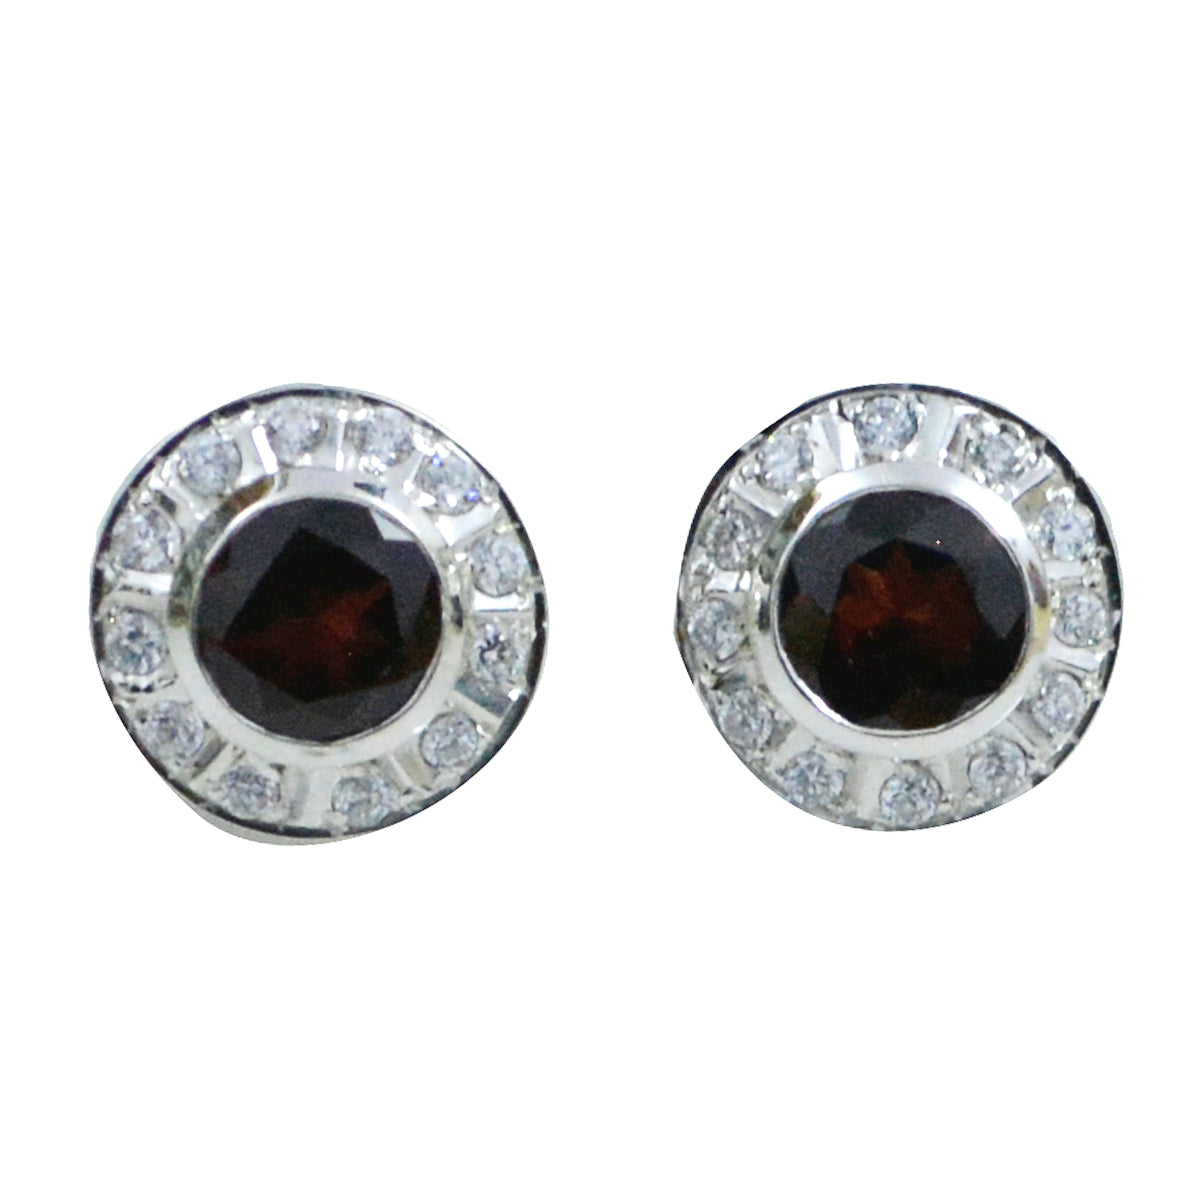 Riyo Real Gemstones round Faceted Red Garnet Silver Earrings gift for cyber Monday